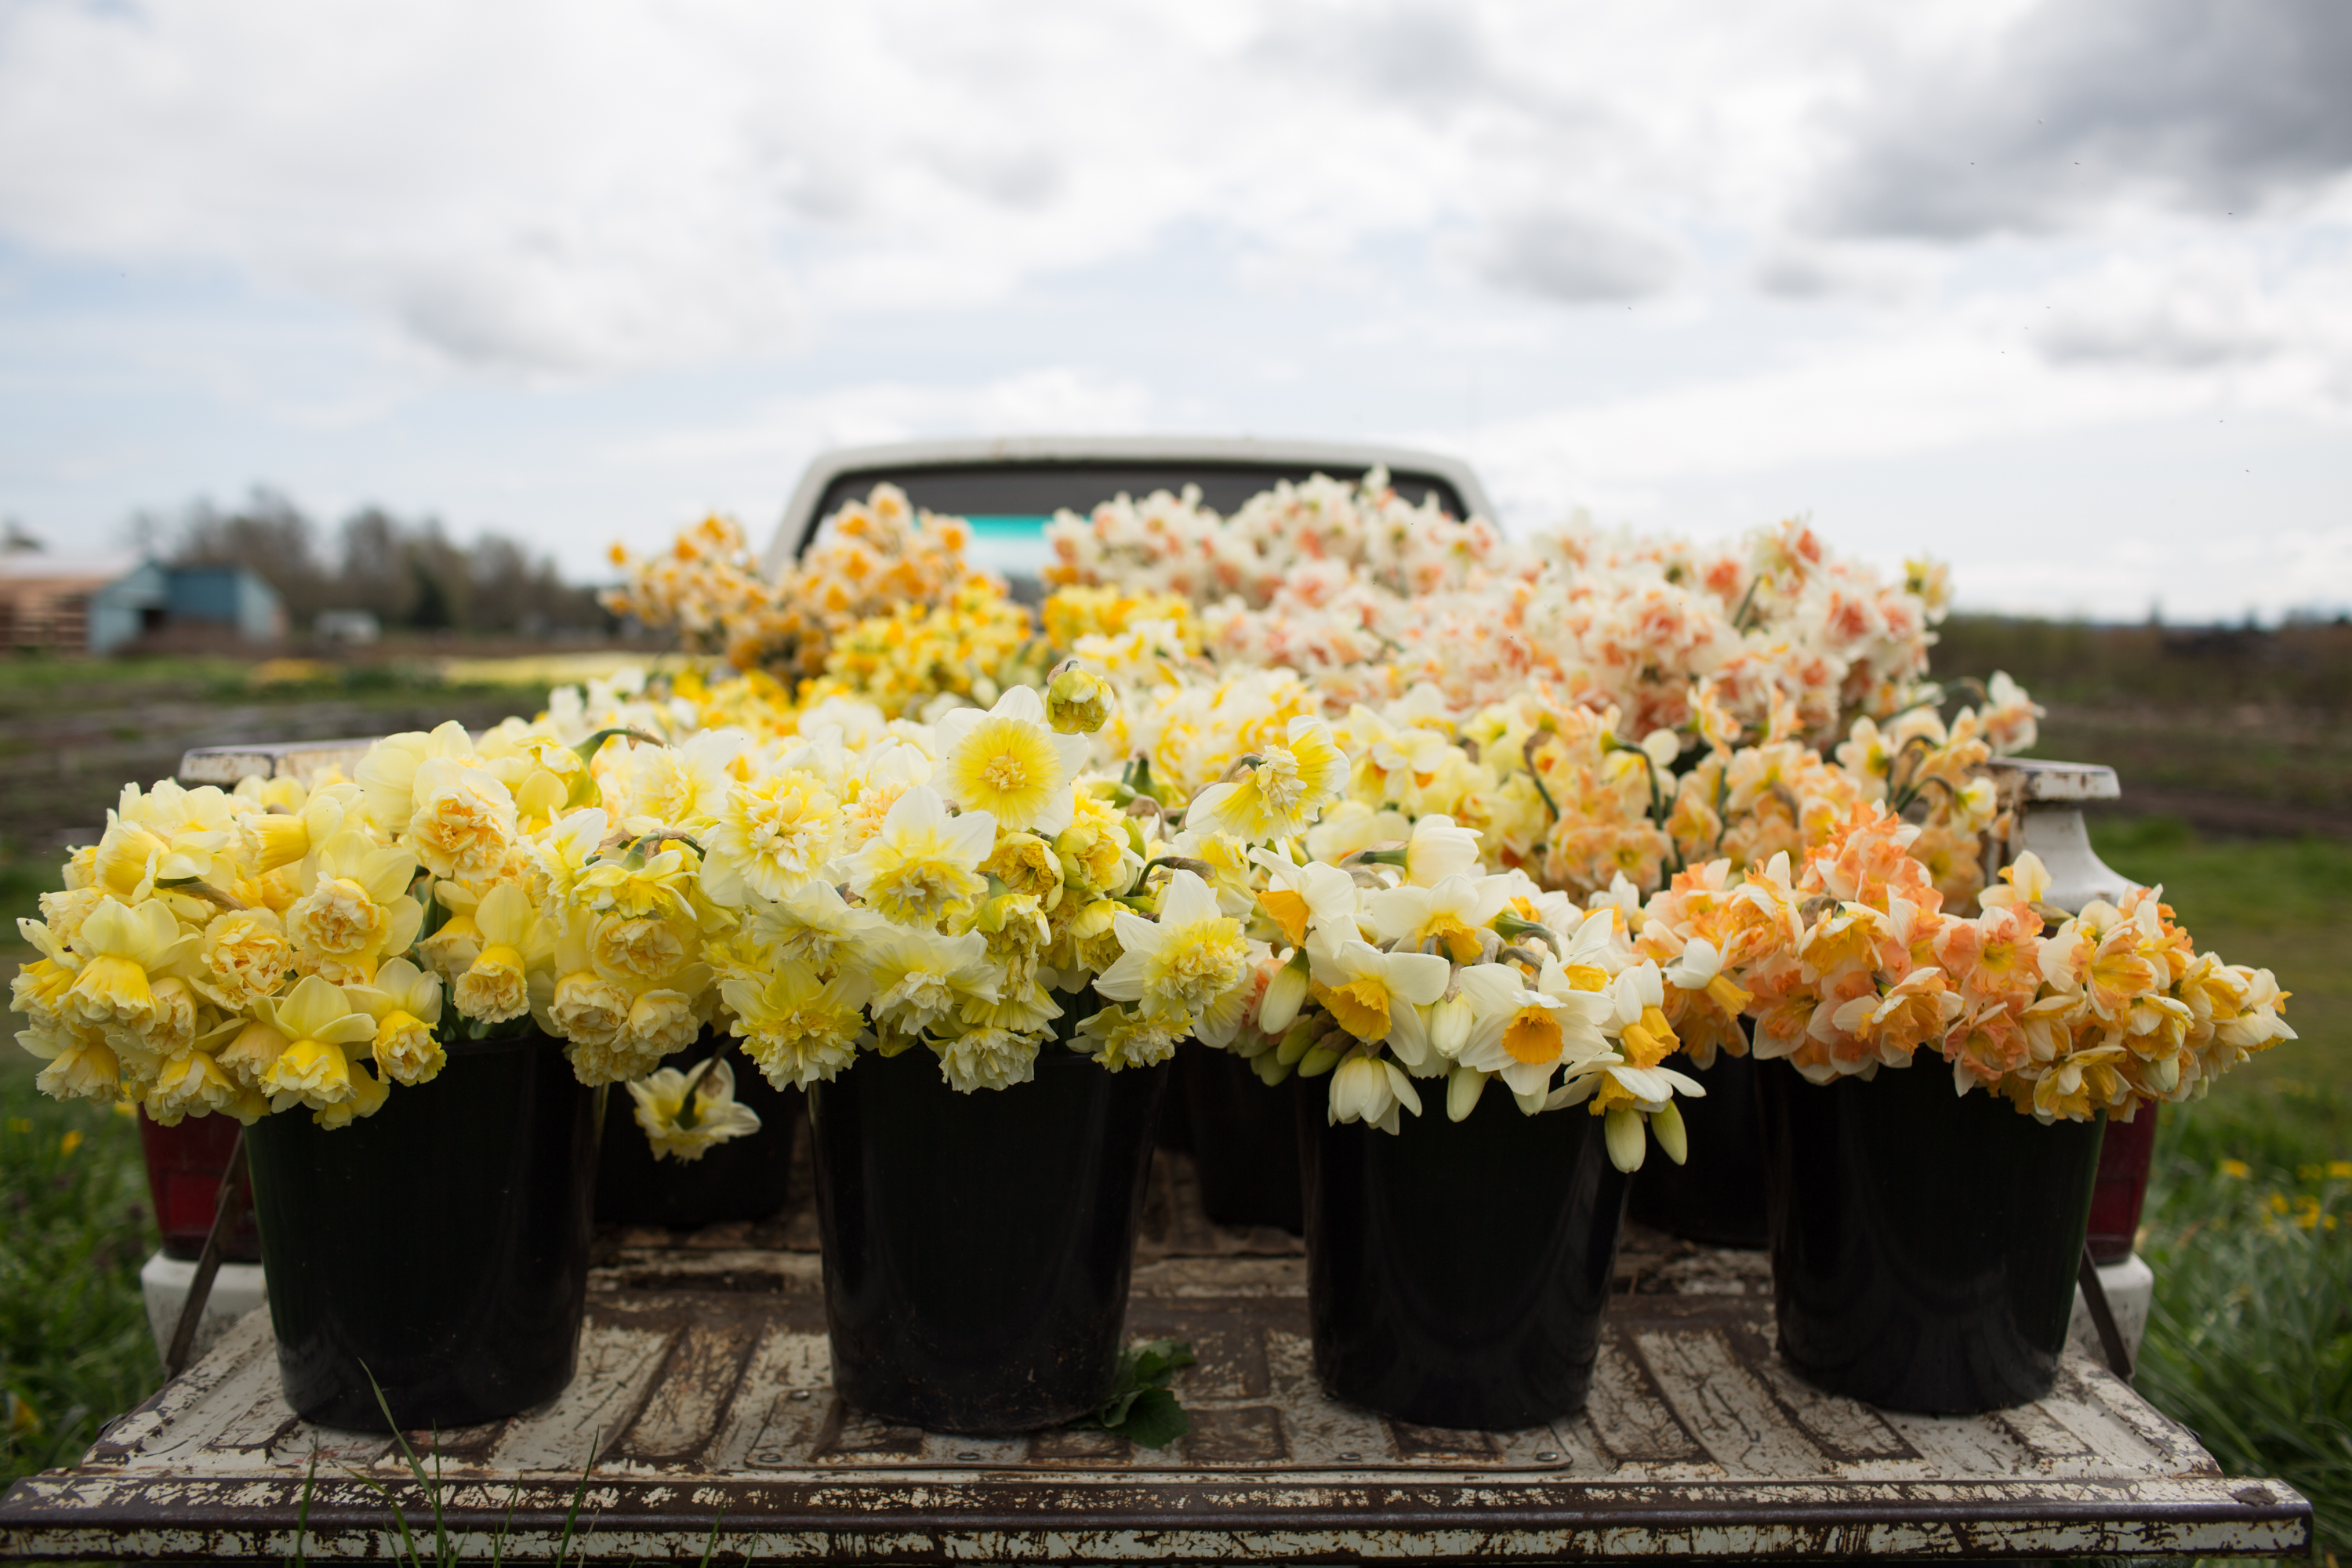 Buckets of daffodils in a truck bed